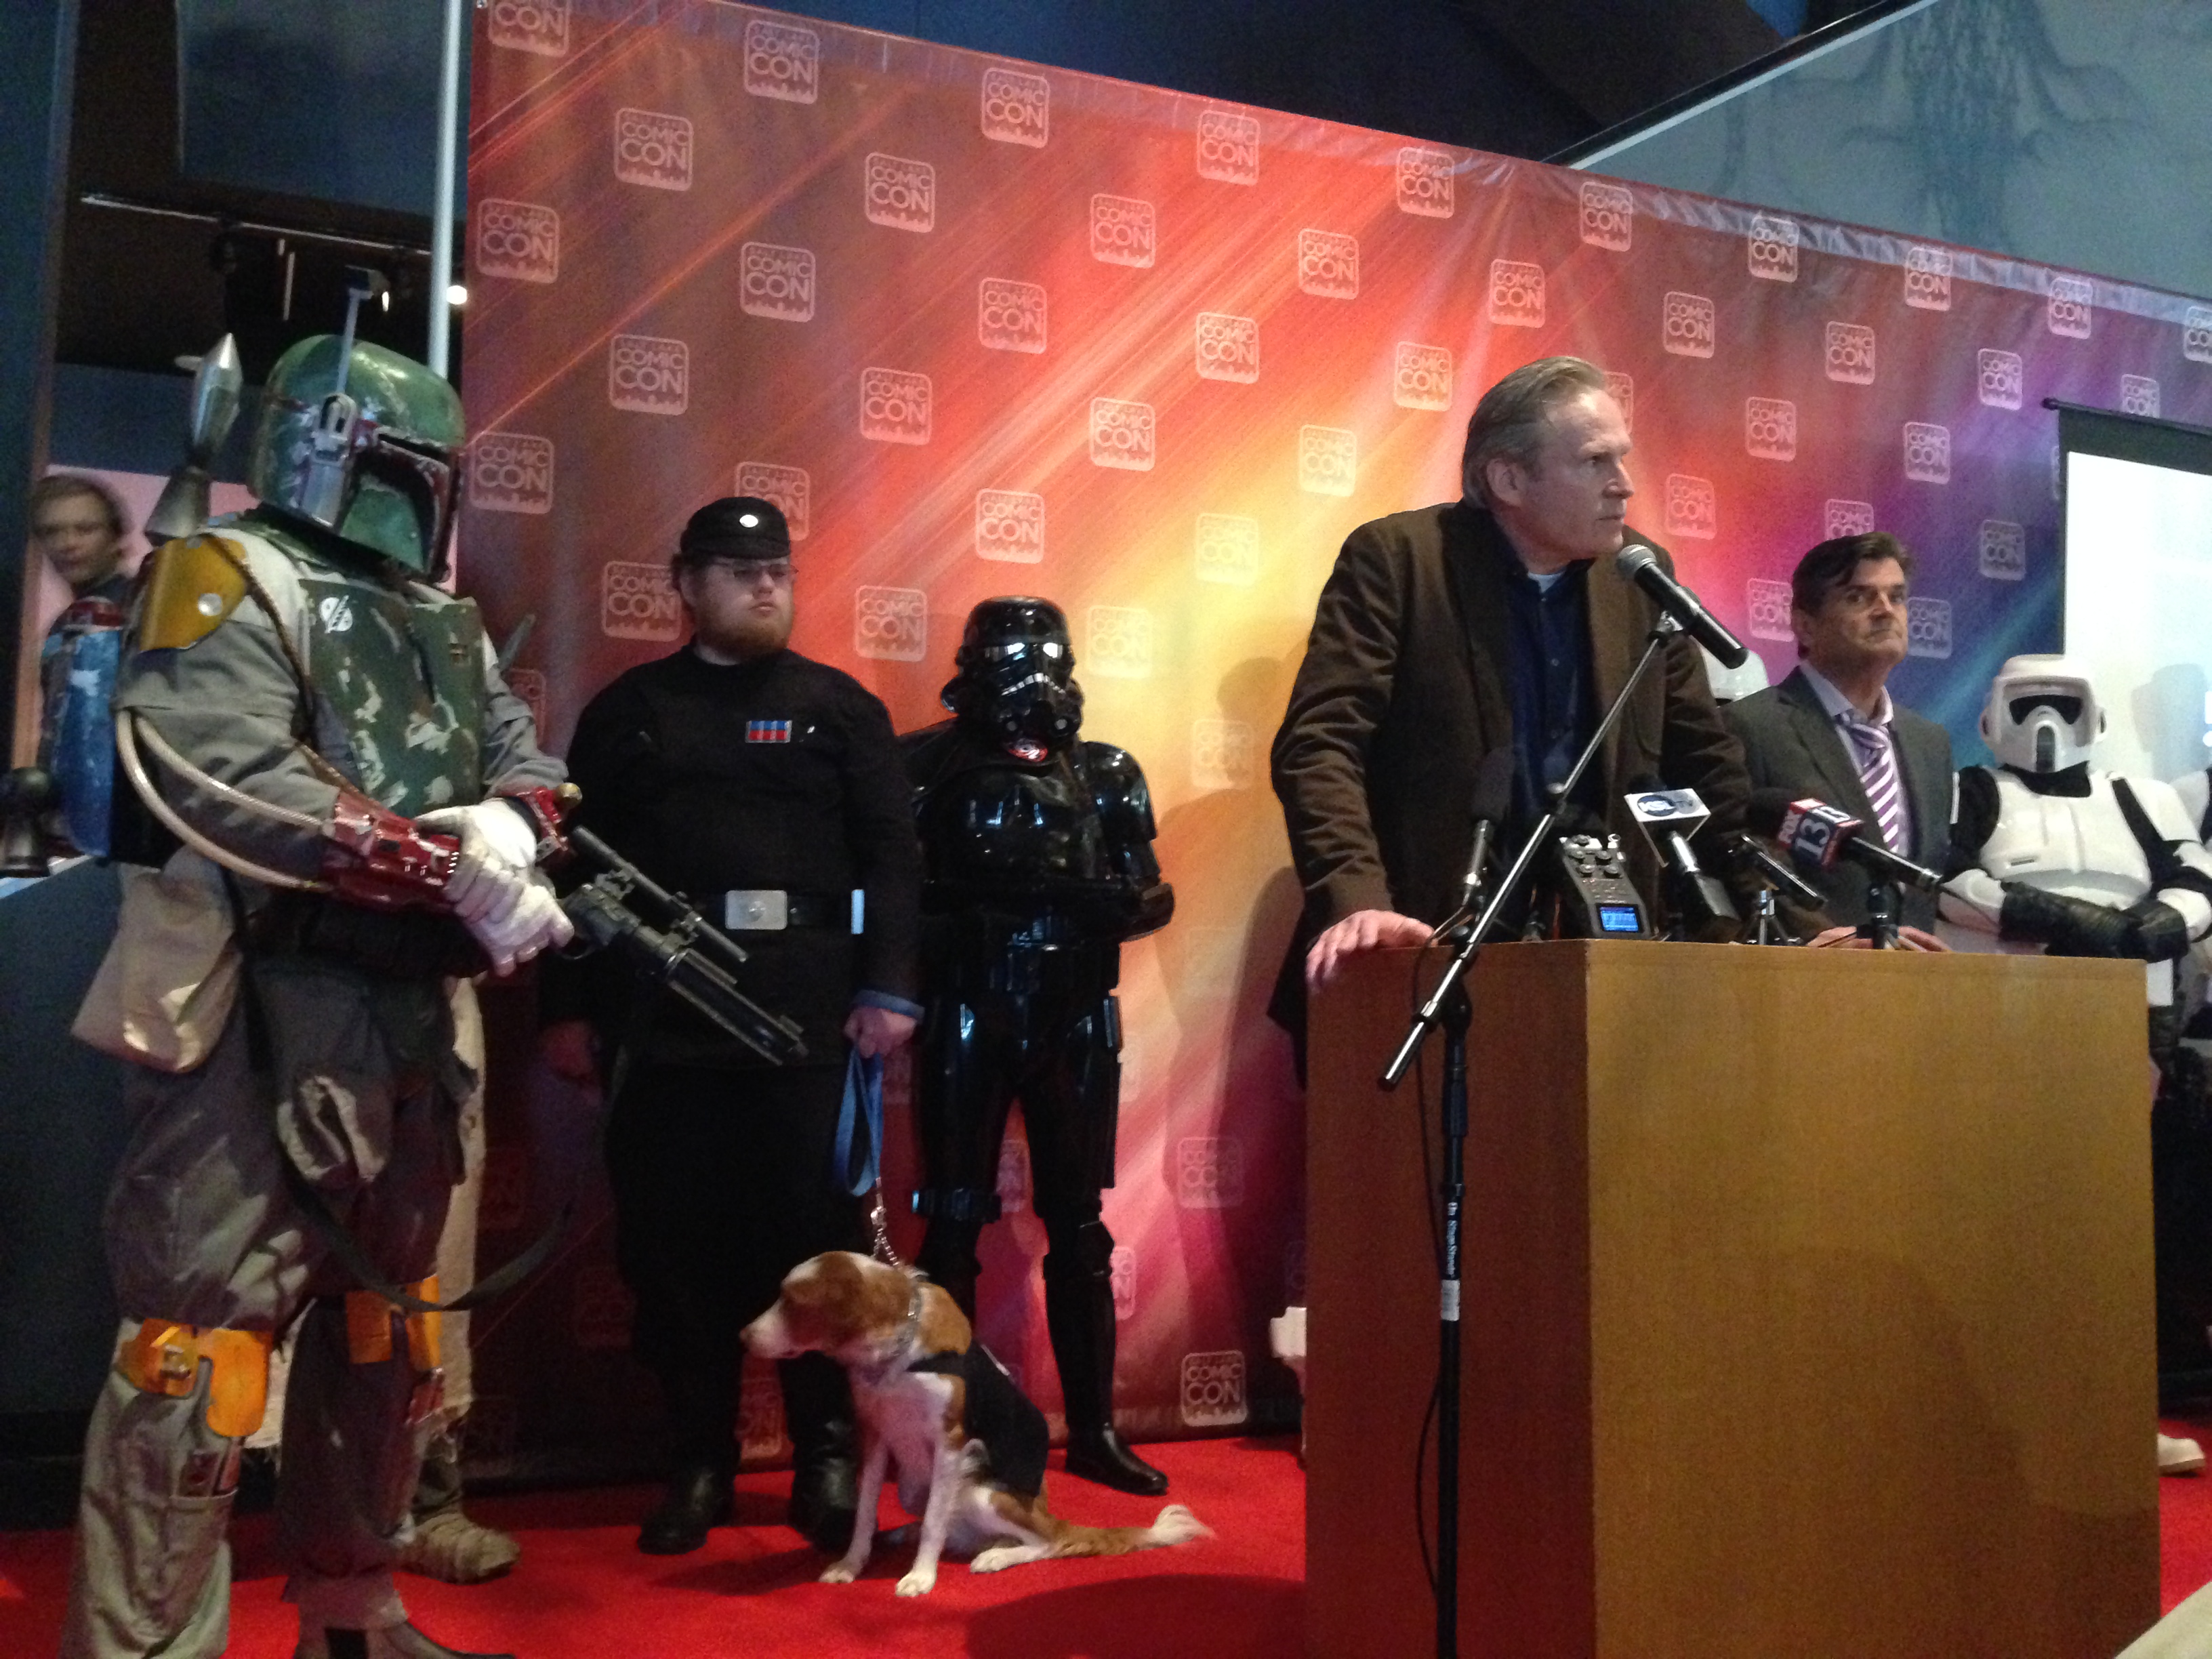 Salt Lake Comic Con co-founder Dan Farr addresses fans and the media at a press conference on May 13, 2014.